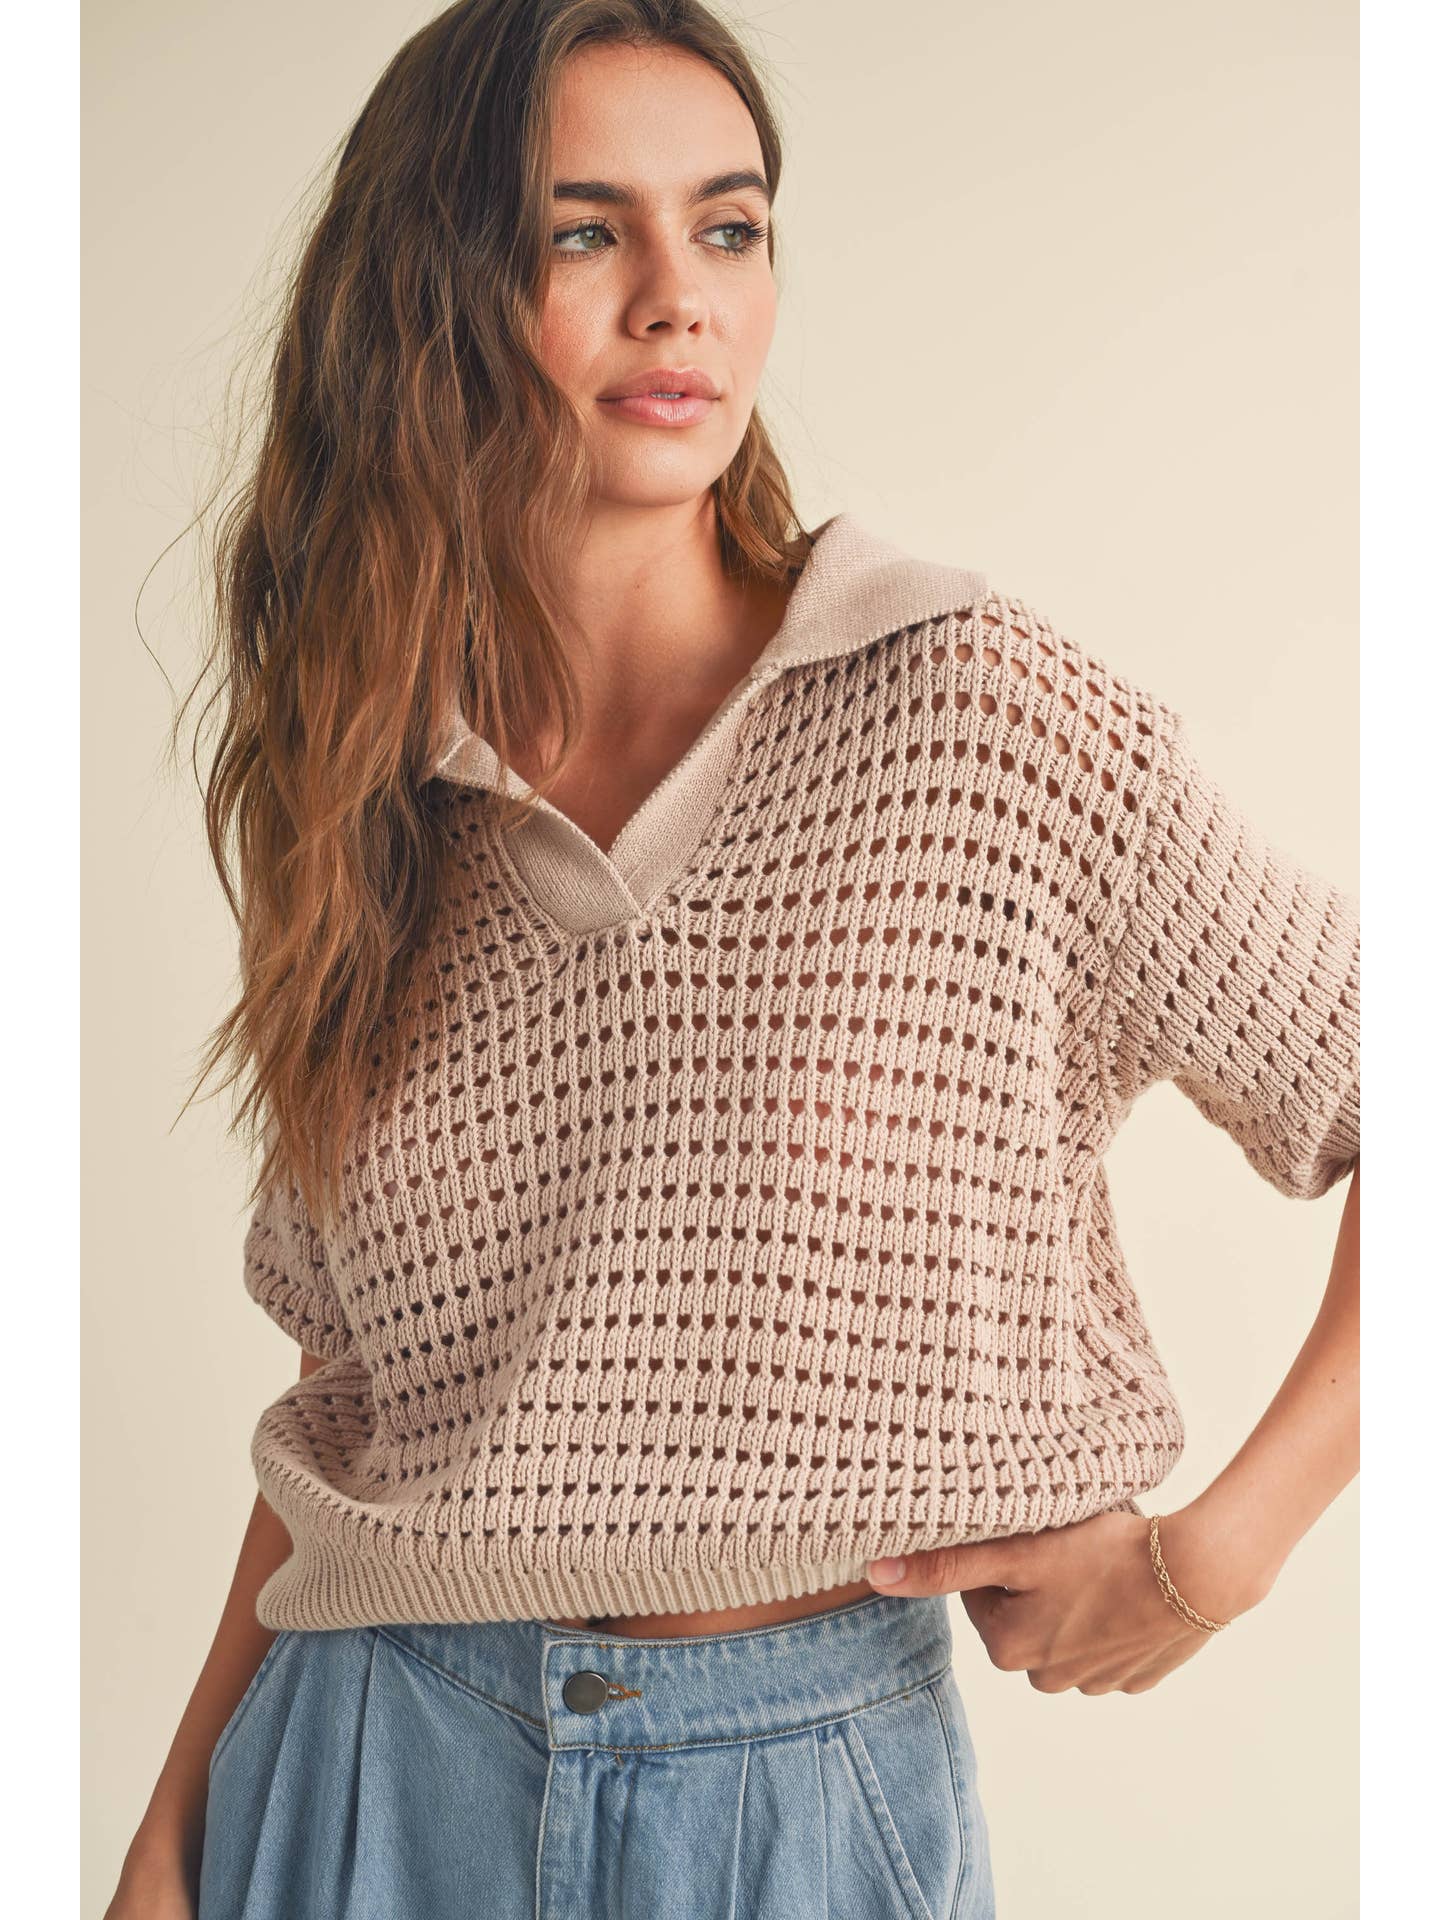 Crochet Collared Top (3 Colors)